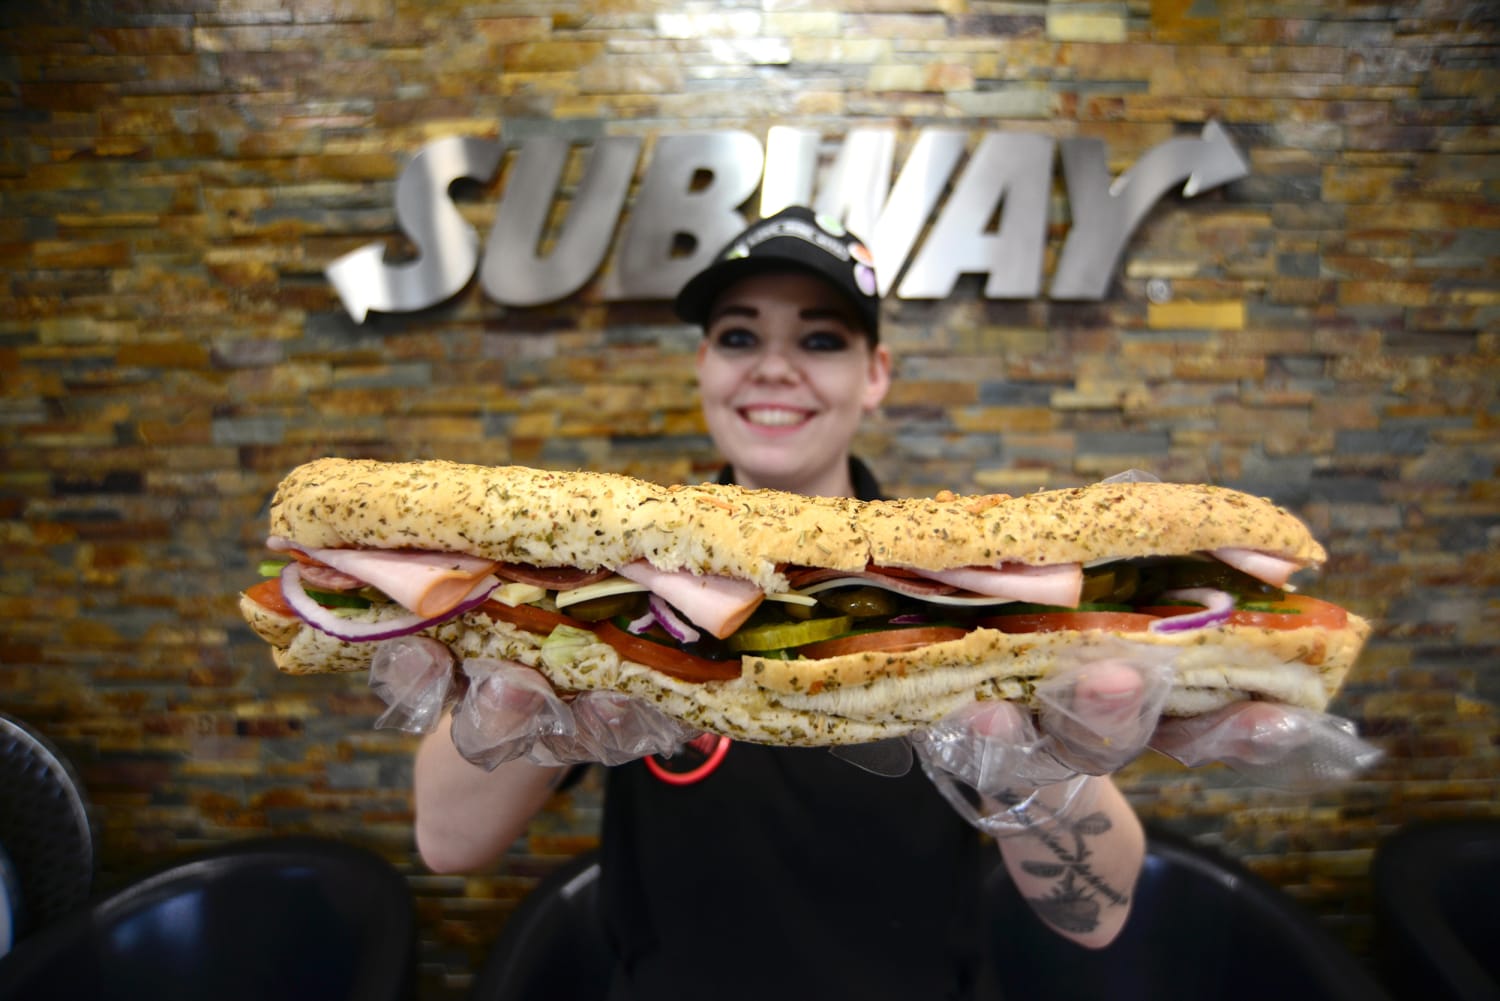 Subway Offering Free Sandwiches for Life to First Person Who Gets Foot-Long Tattoo